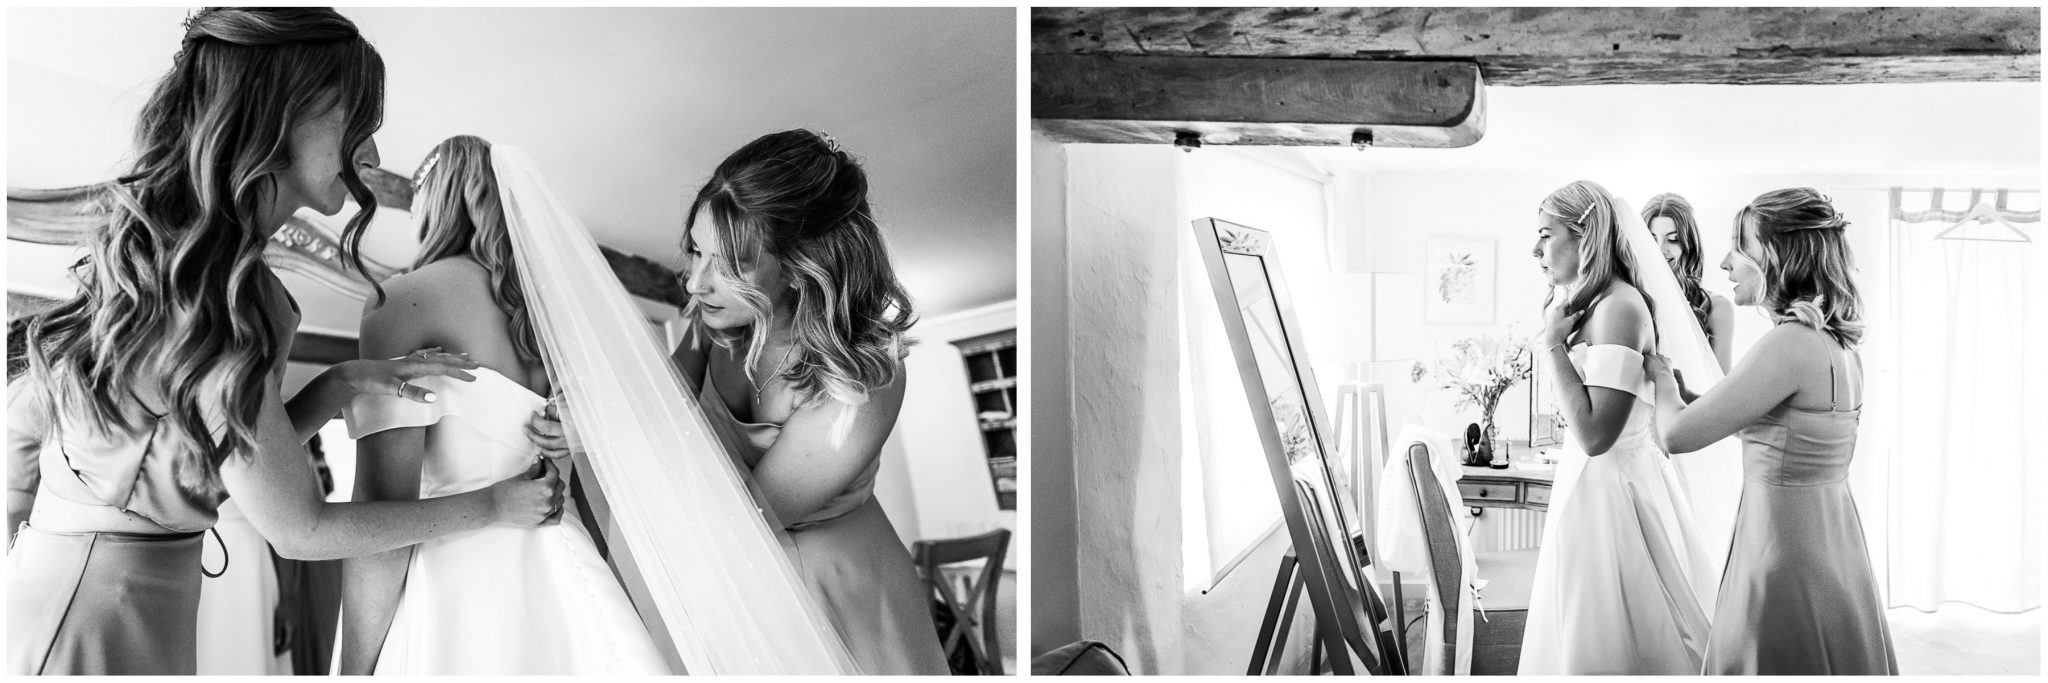 Black and white candid photographs of bridesmaids helping bride to get dressed in Avon Suite at Dorset wedding venue